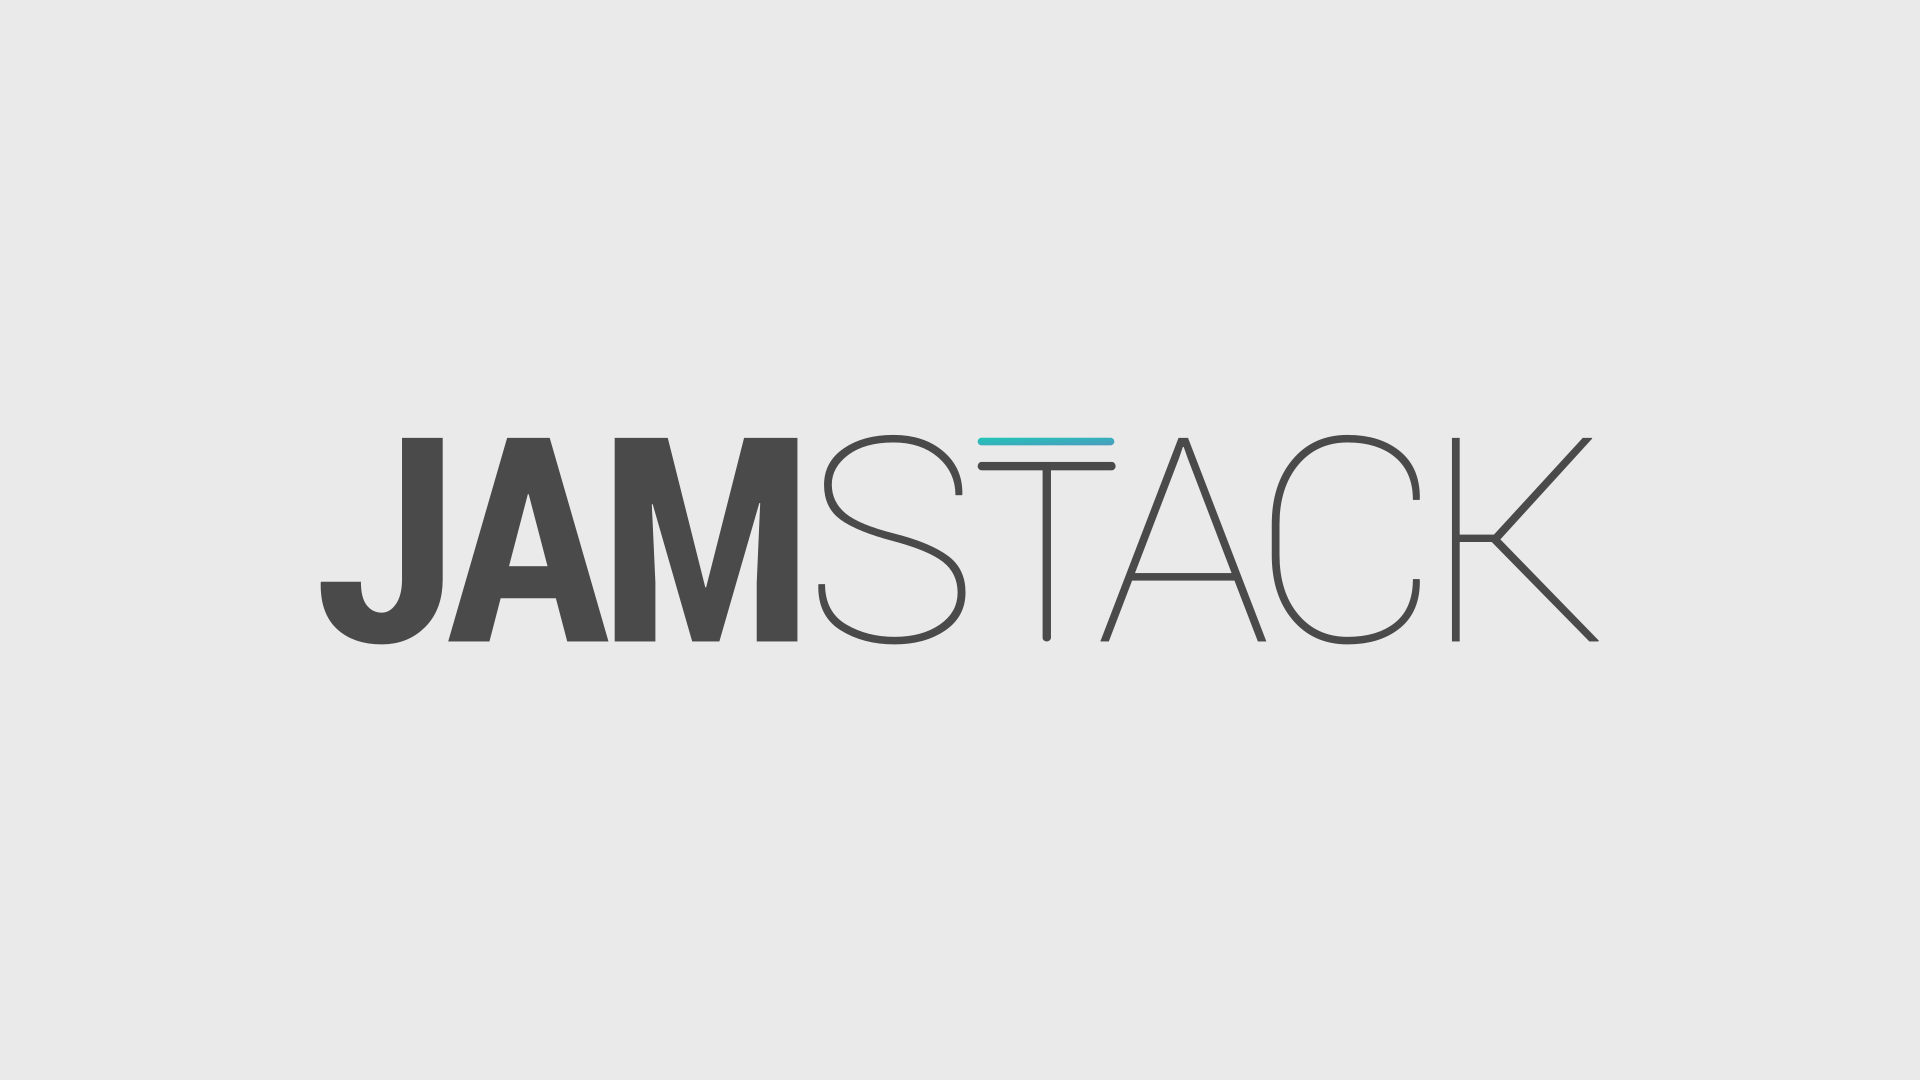 Introduction to the JAMstack Course - What I Learned